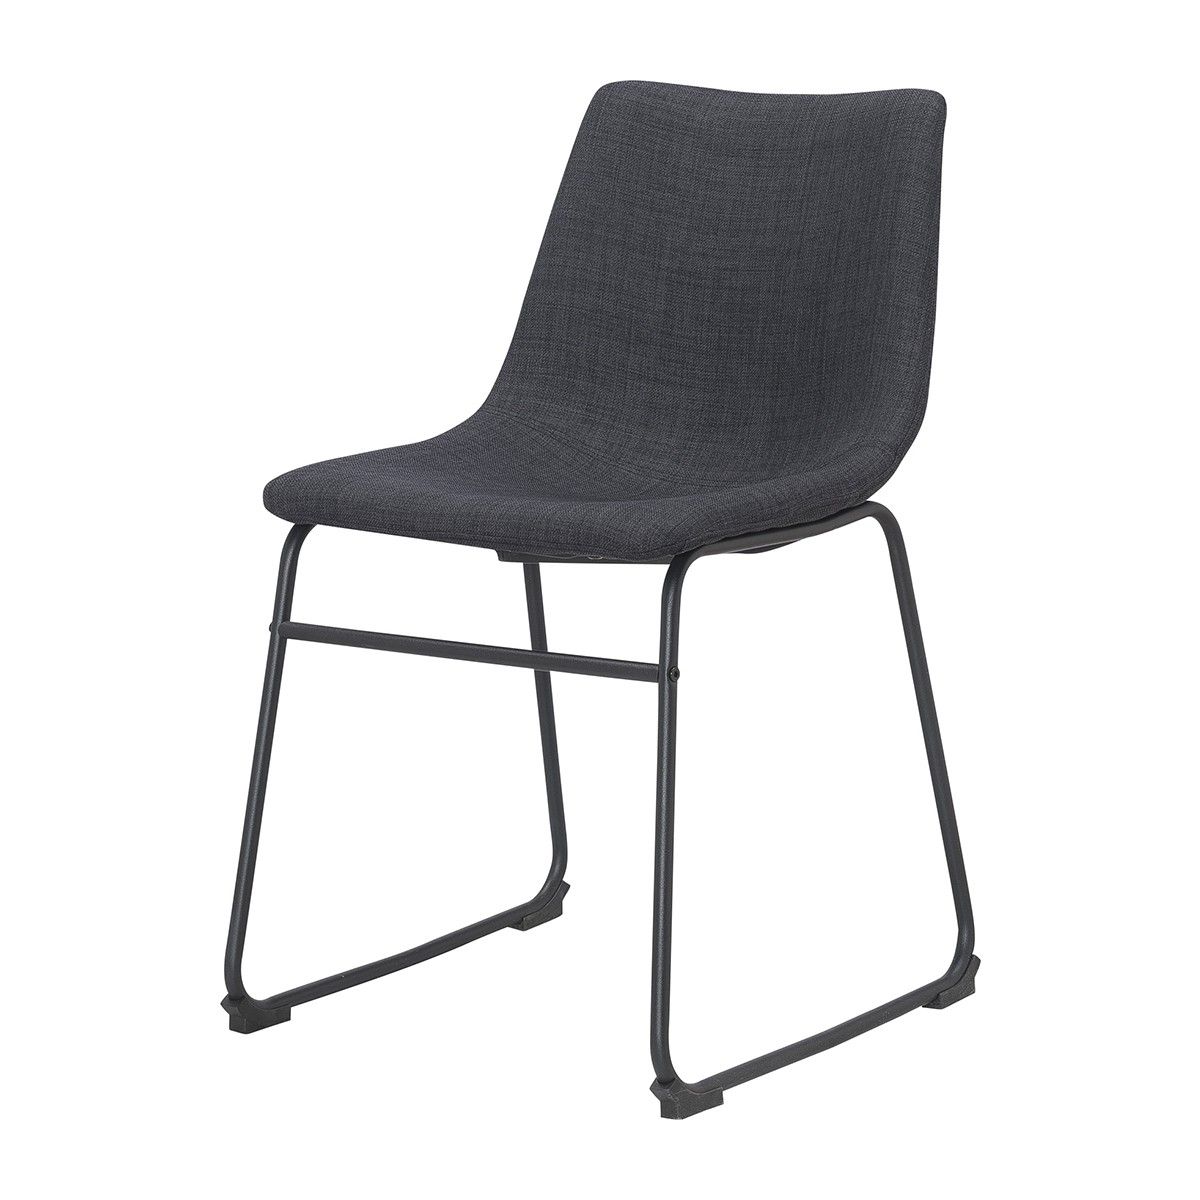 2018 Charcoal Dining Chairs Within Life Interiors – Bailey Dining Chair (charcoal) – Modern Dining (View 11 of 20)